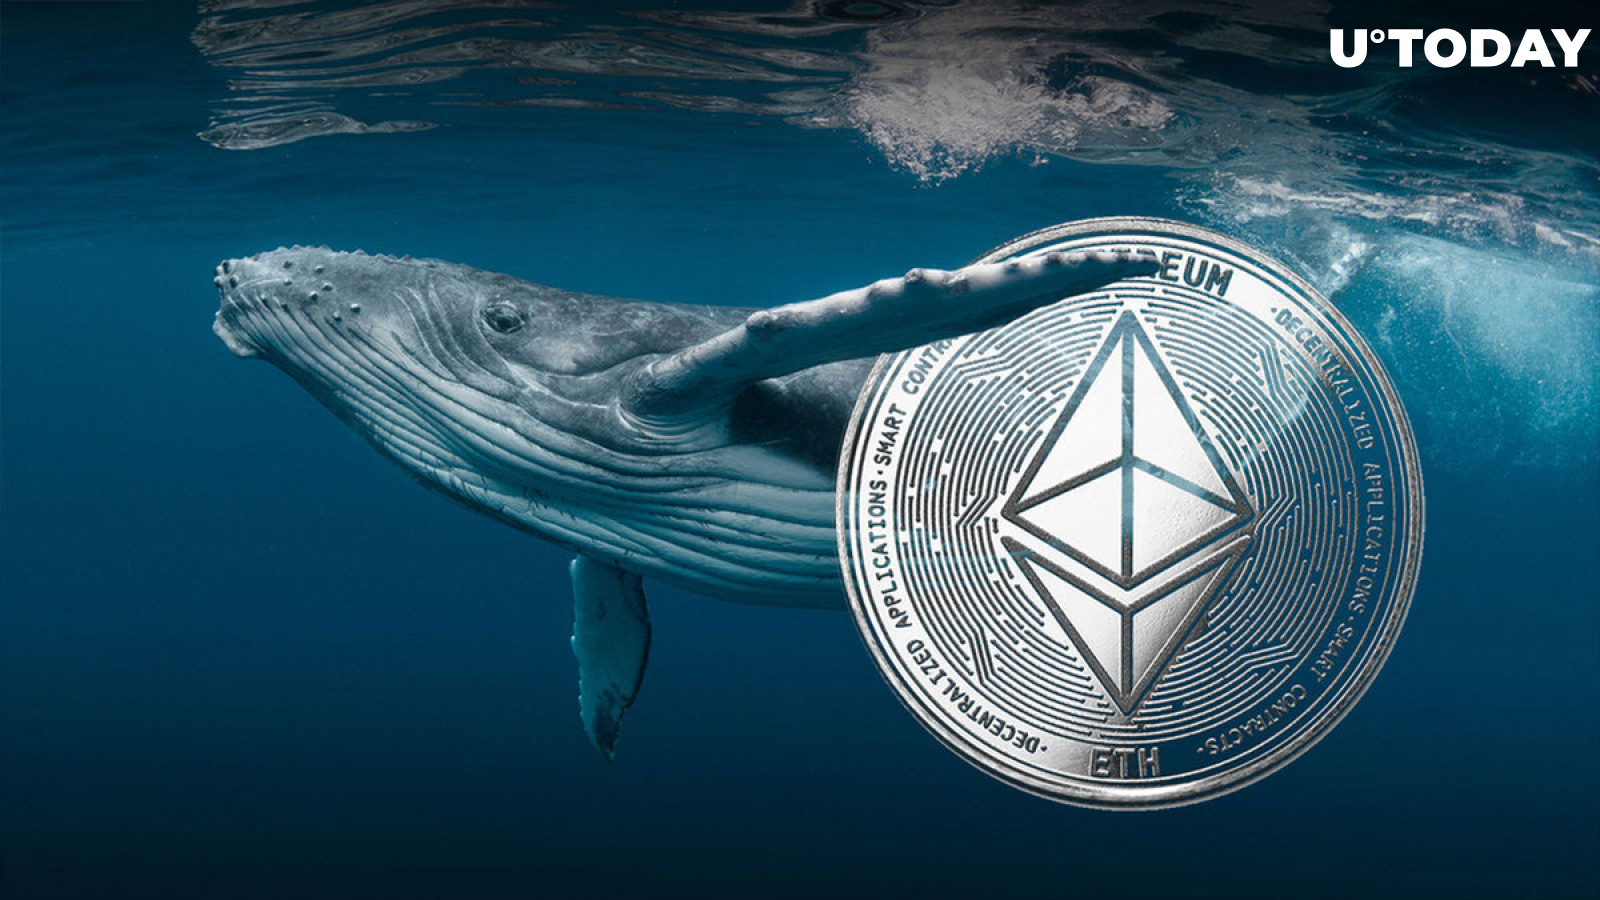 This Whale Keeps Grabbing Ethereum (ETH) Despite Price Rise - Potential Reason